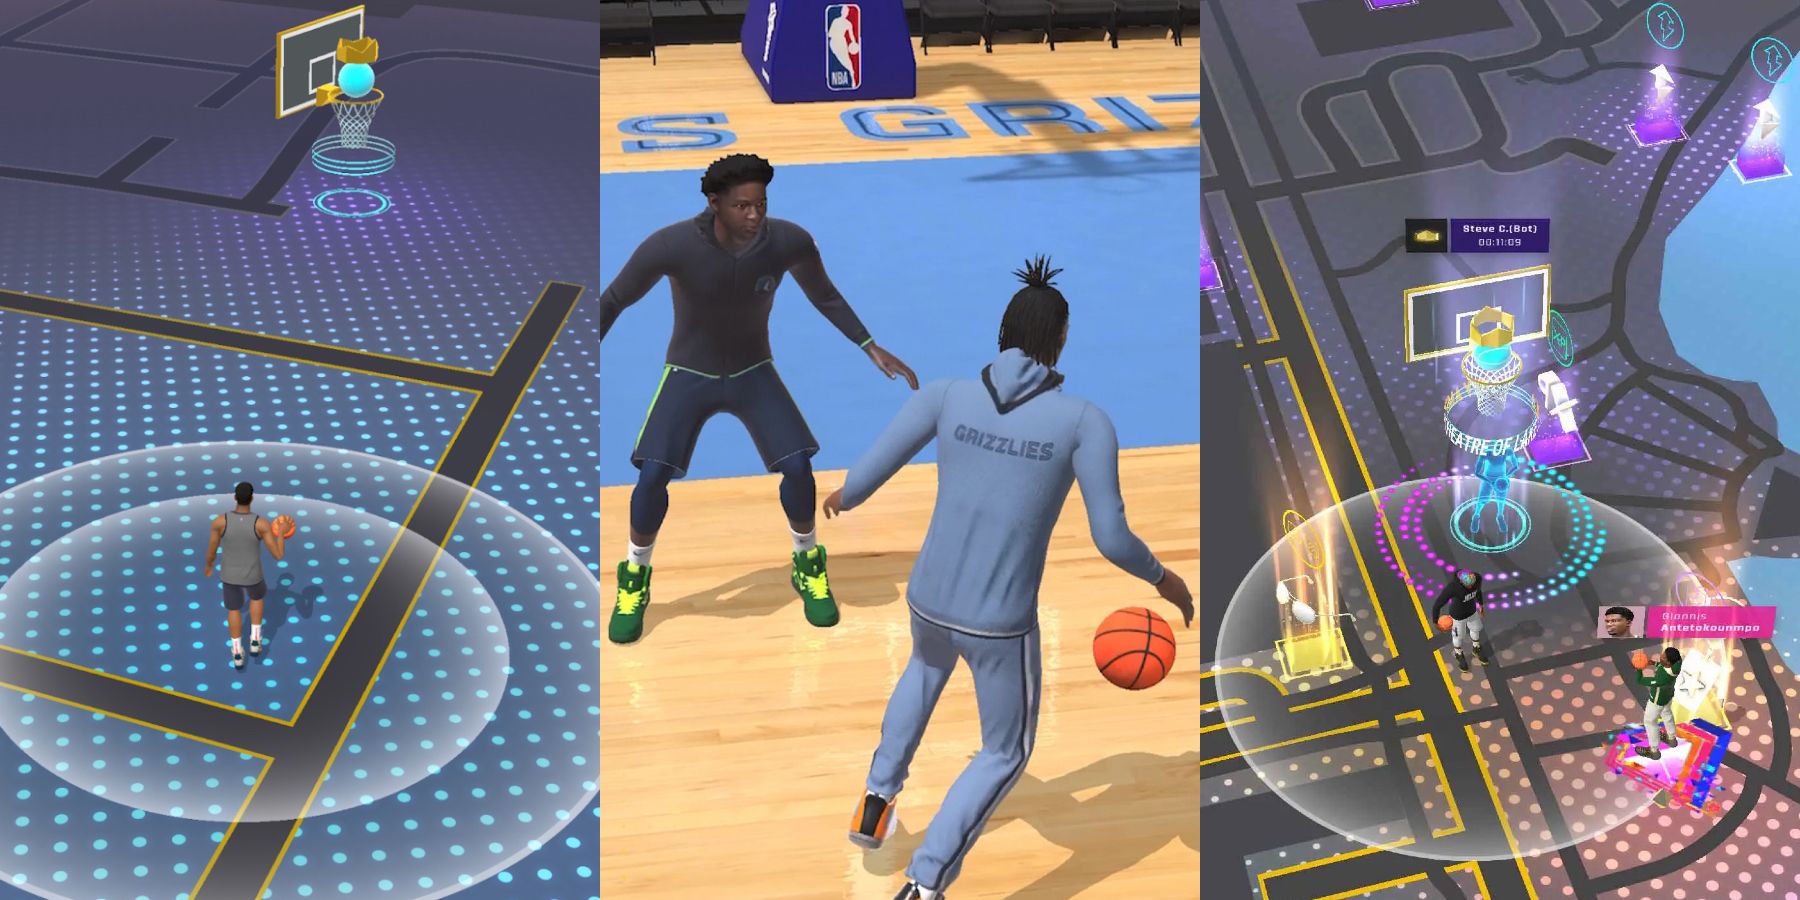 An image split into three vertical sections. Ja Morant dribbles a basketball in NBA All-World in the center, and is flanked by two images of the game's AR map on either side.